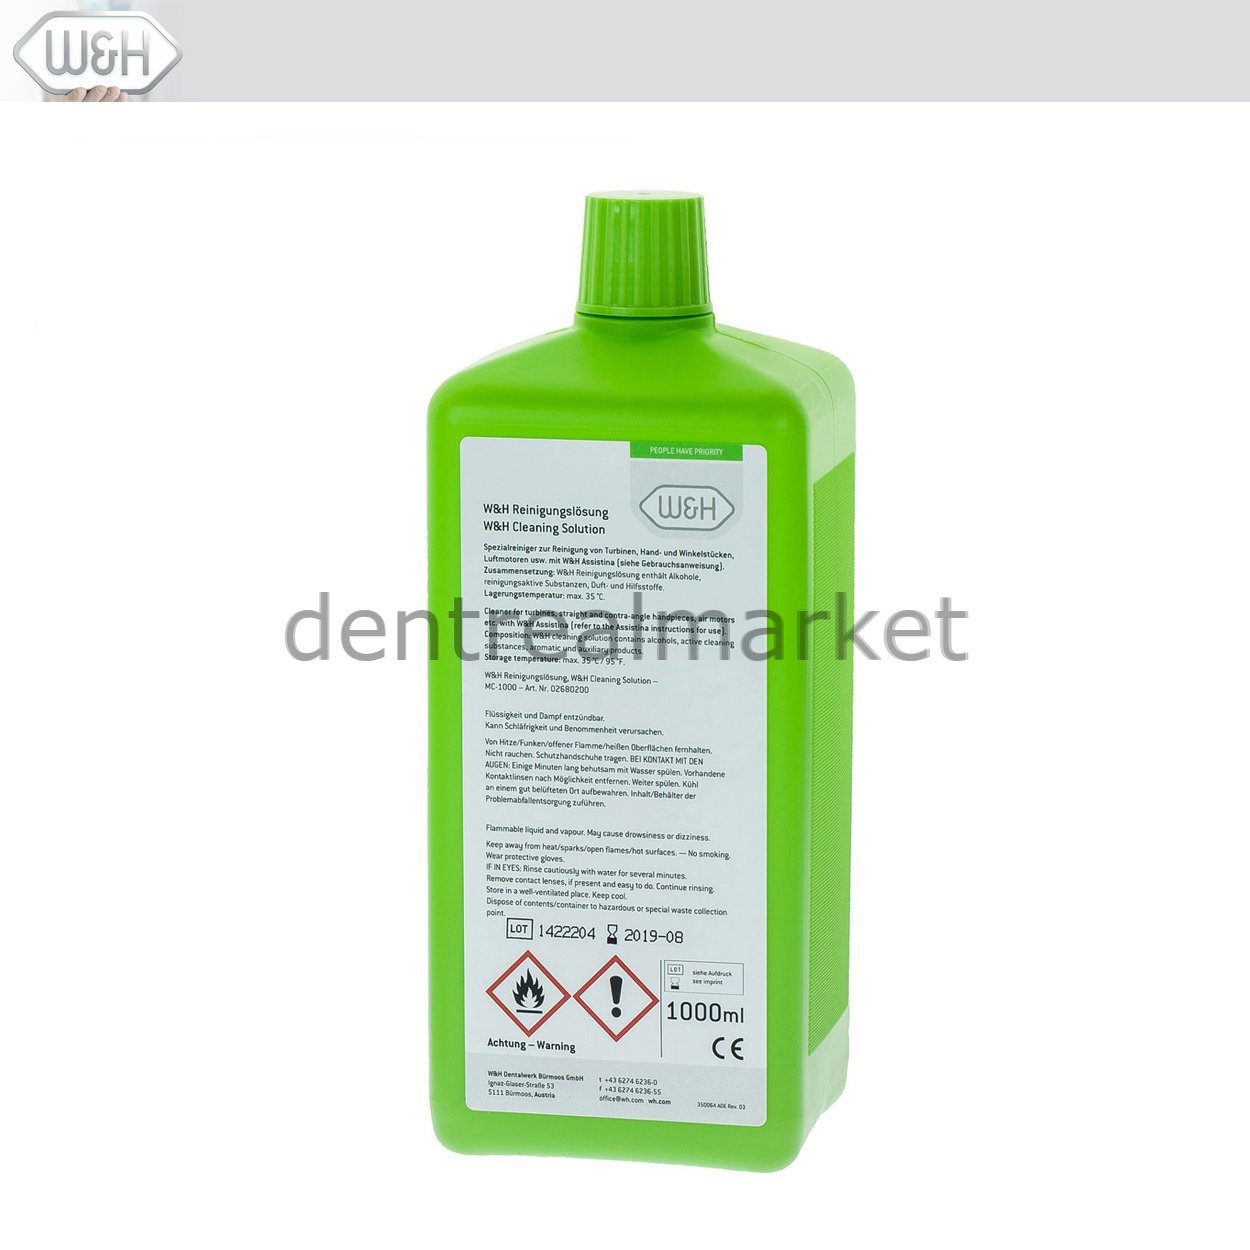 DentrealStore - W&H Dental Assistina Cleaning Solution MC1000